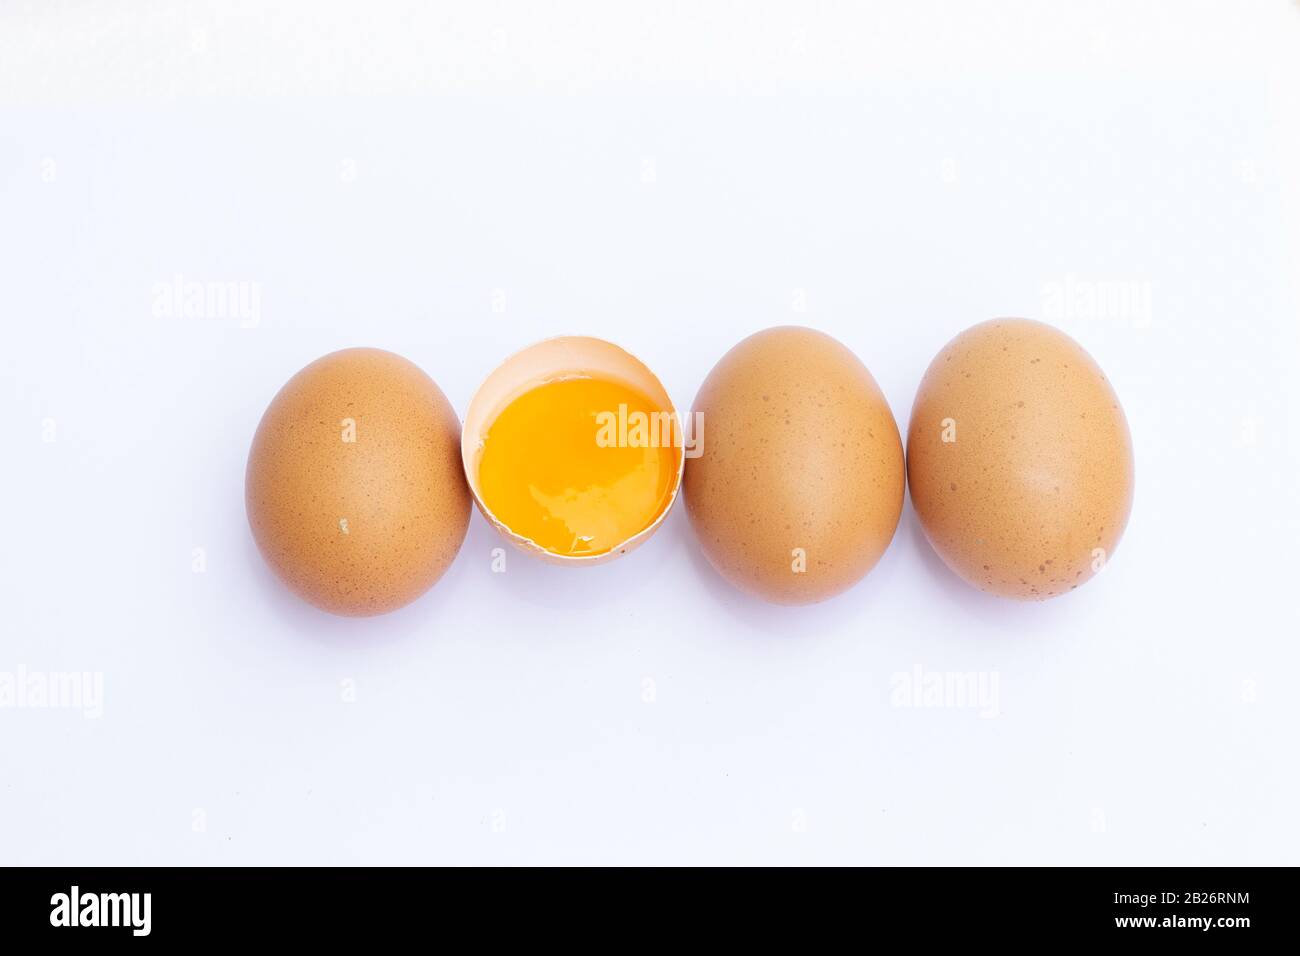 Four brown eggs arranged in a row on a white background And there was one egg broken in half, and saw the yolk in it. Stock Photo